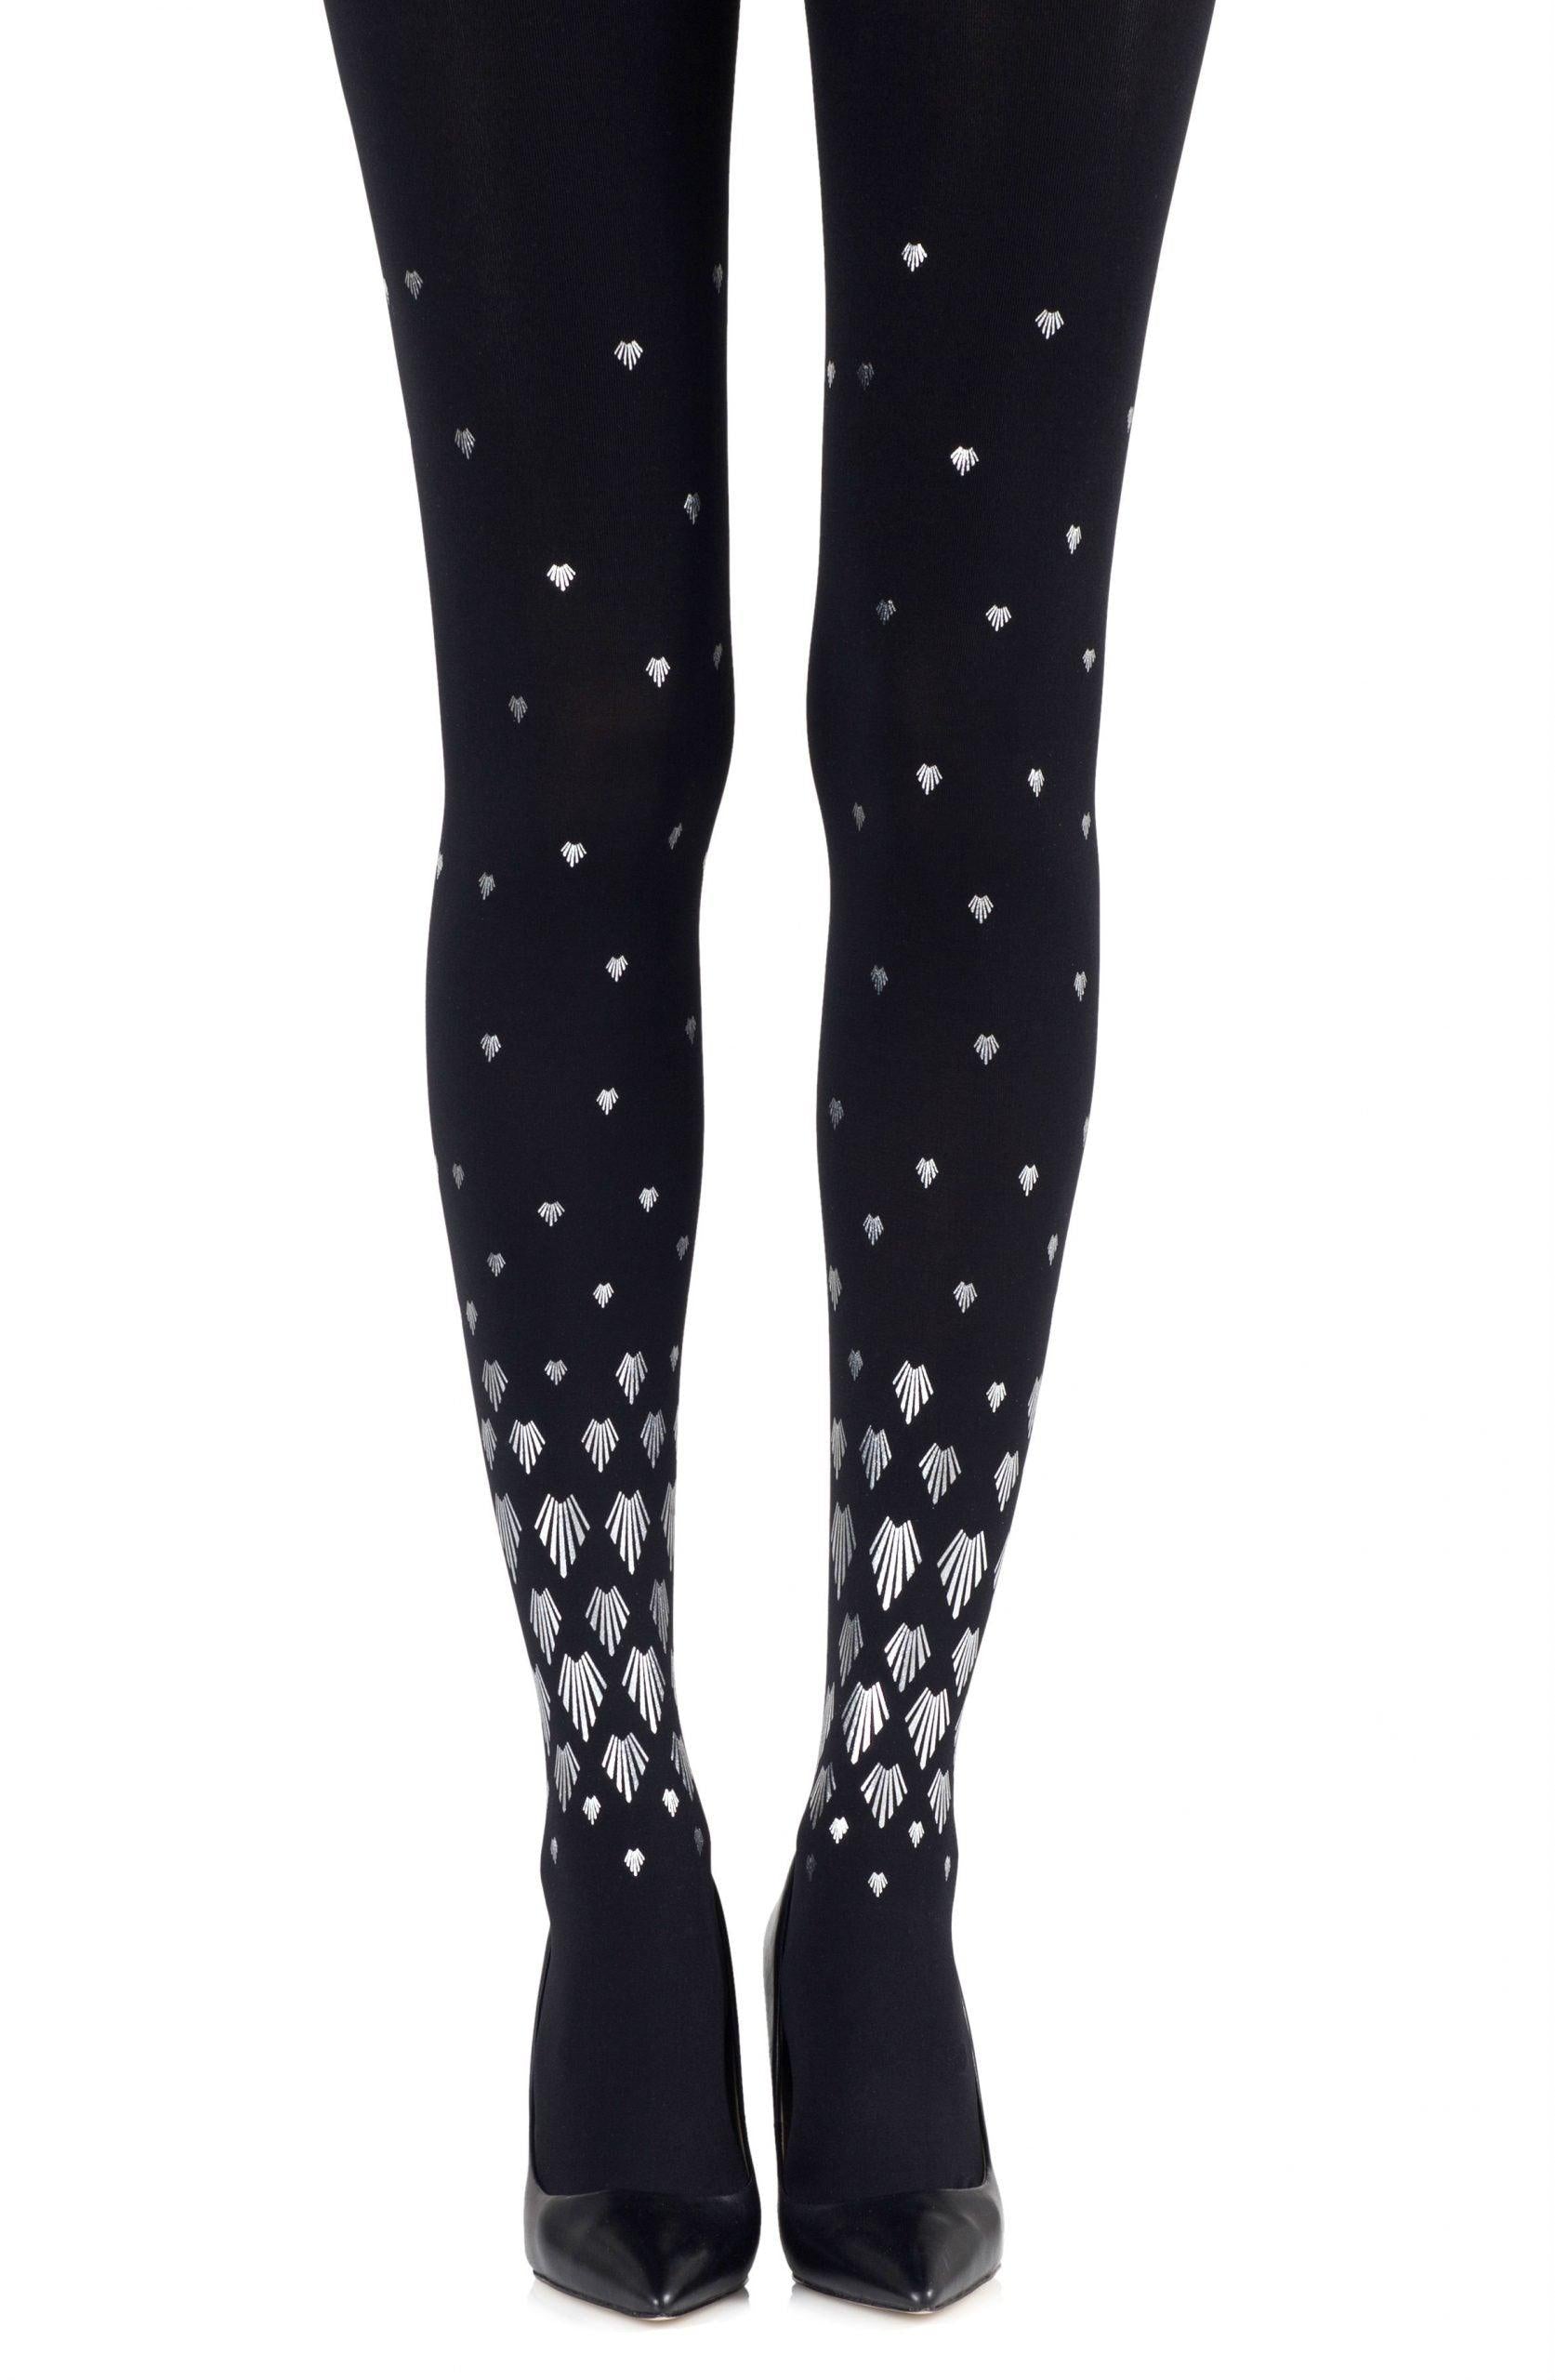 Zohara "Shell Out" Black Print Tights - Sydney Rose Lingerie 